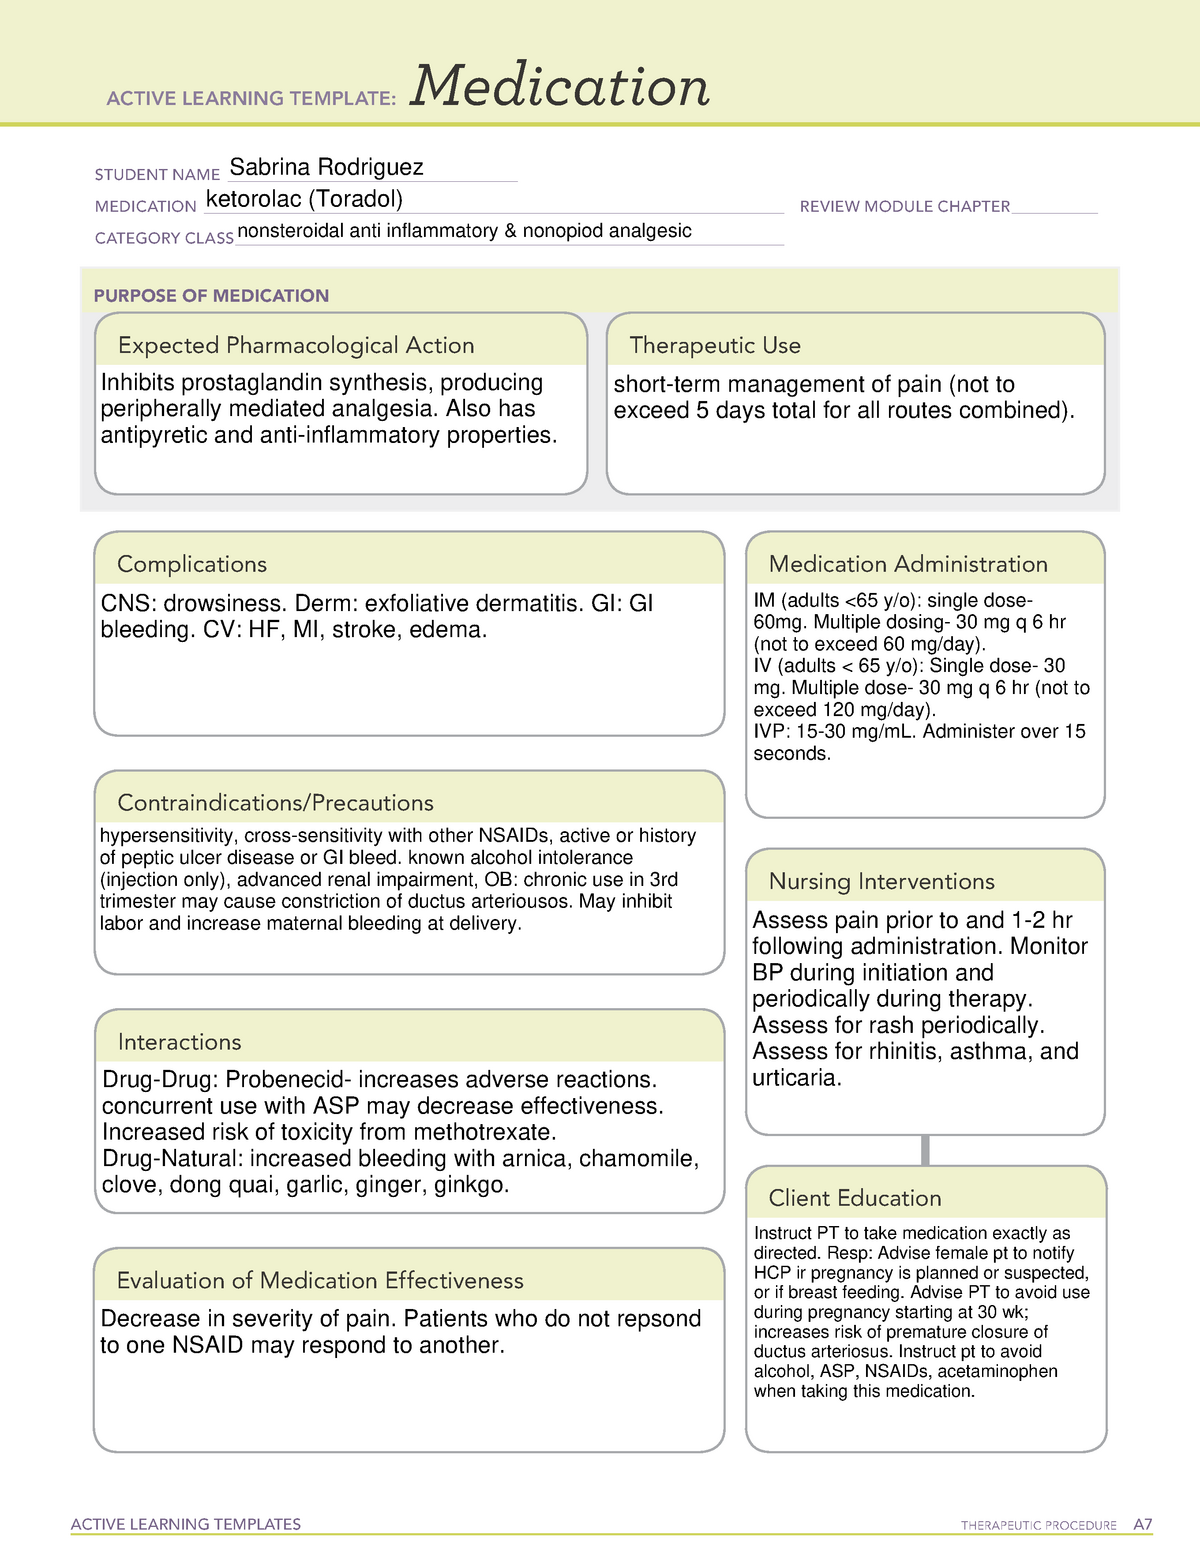 416 Clinical Week 3 Medication Template ACTIVE LEARNING TEMPLATES